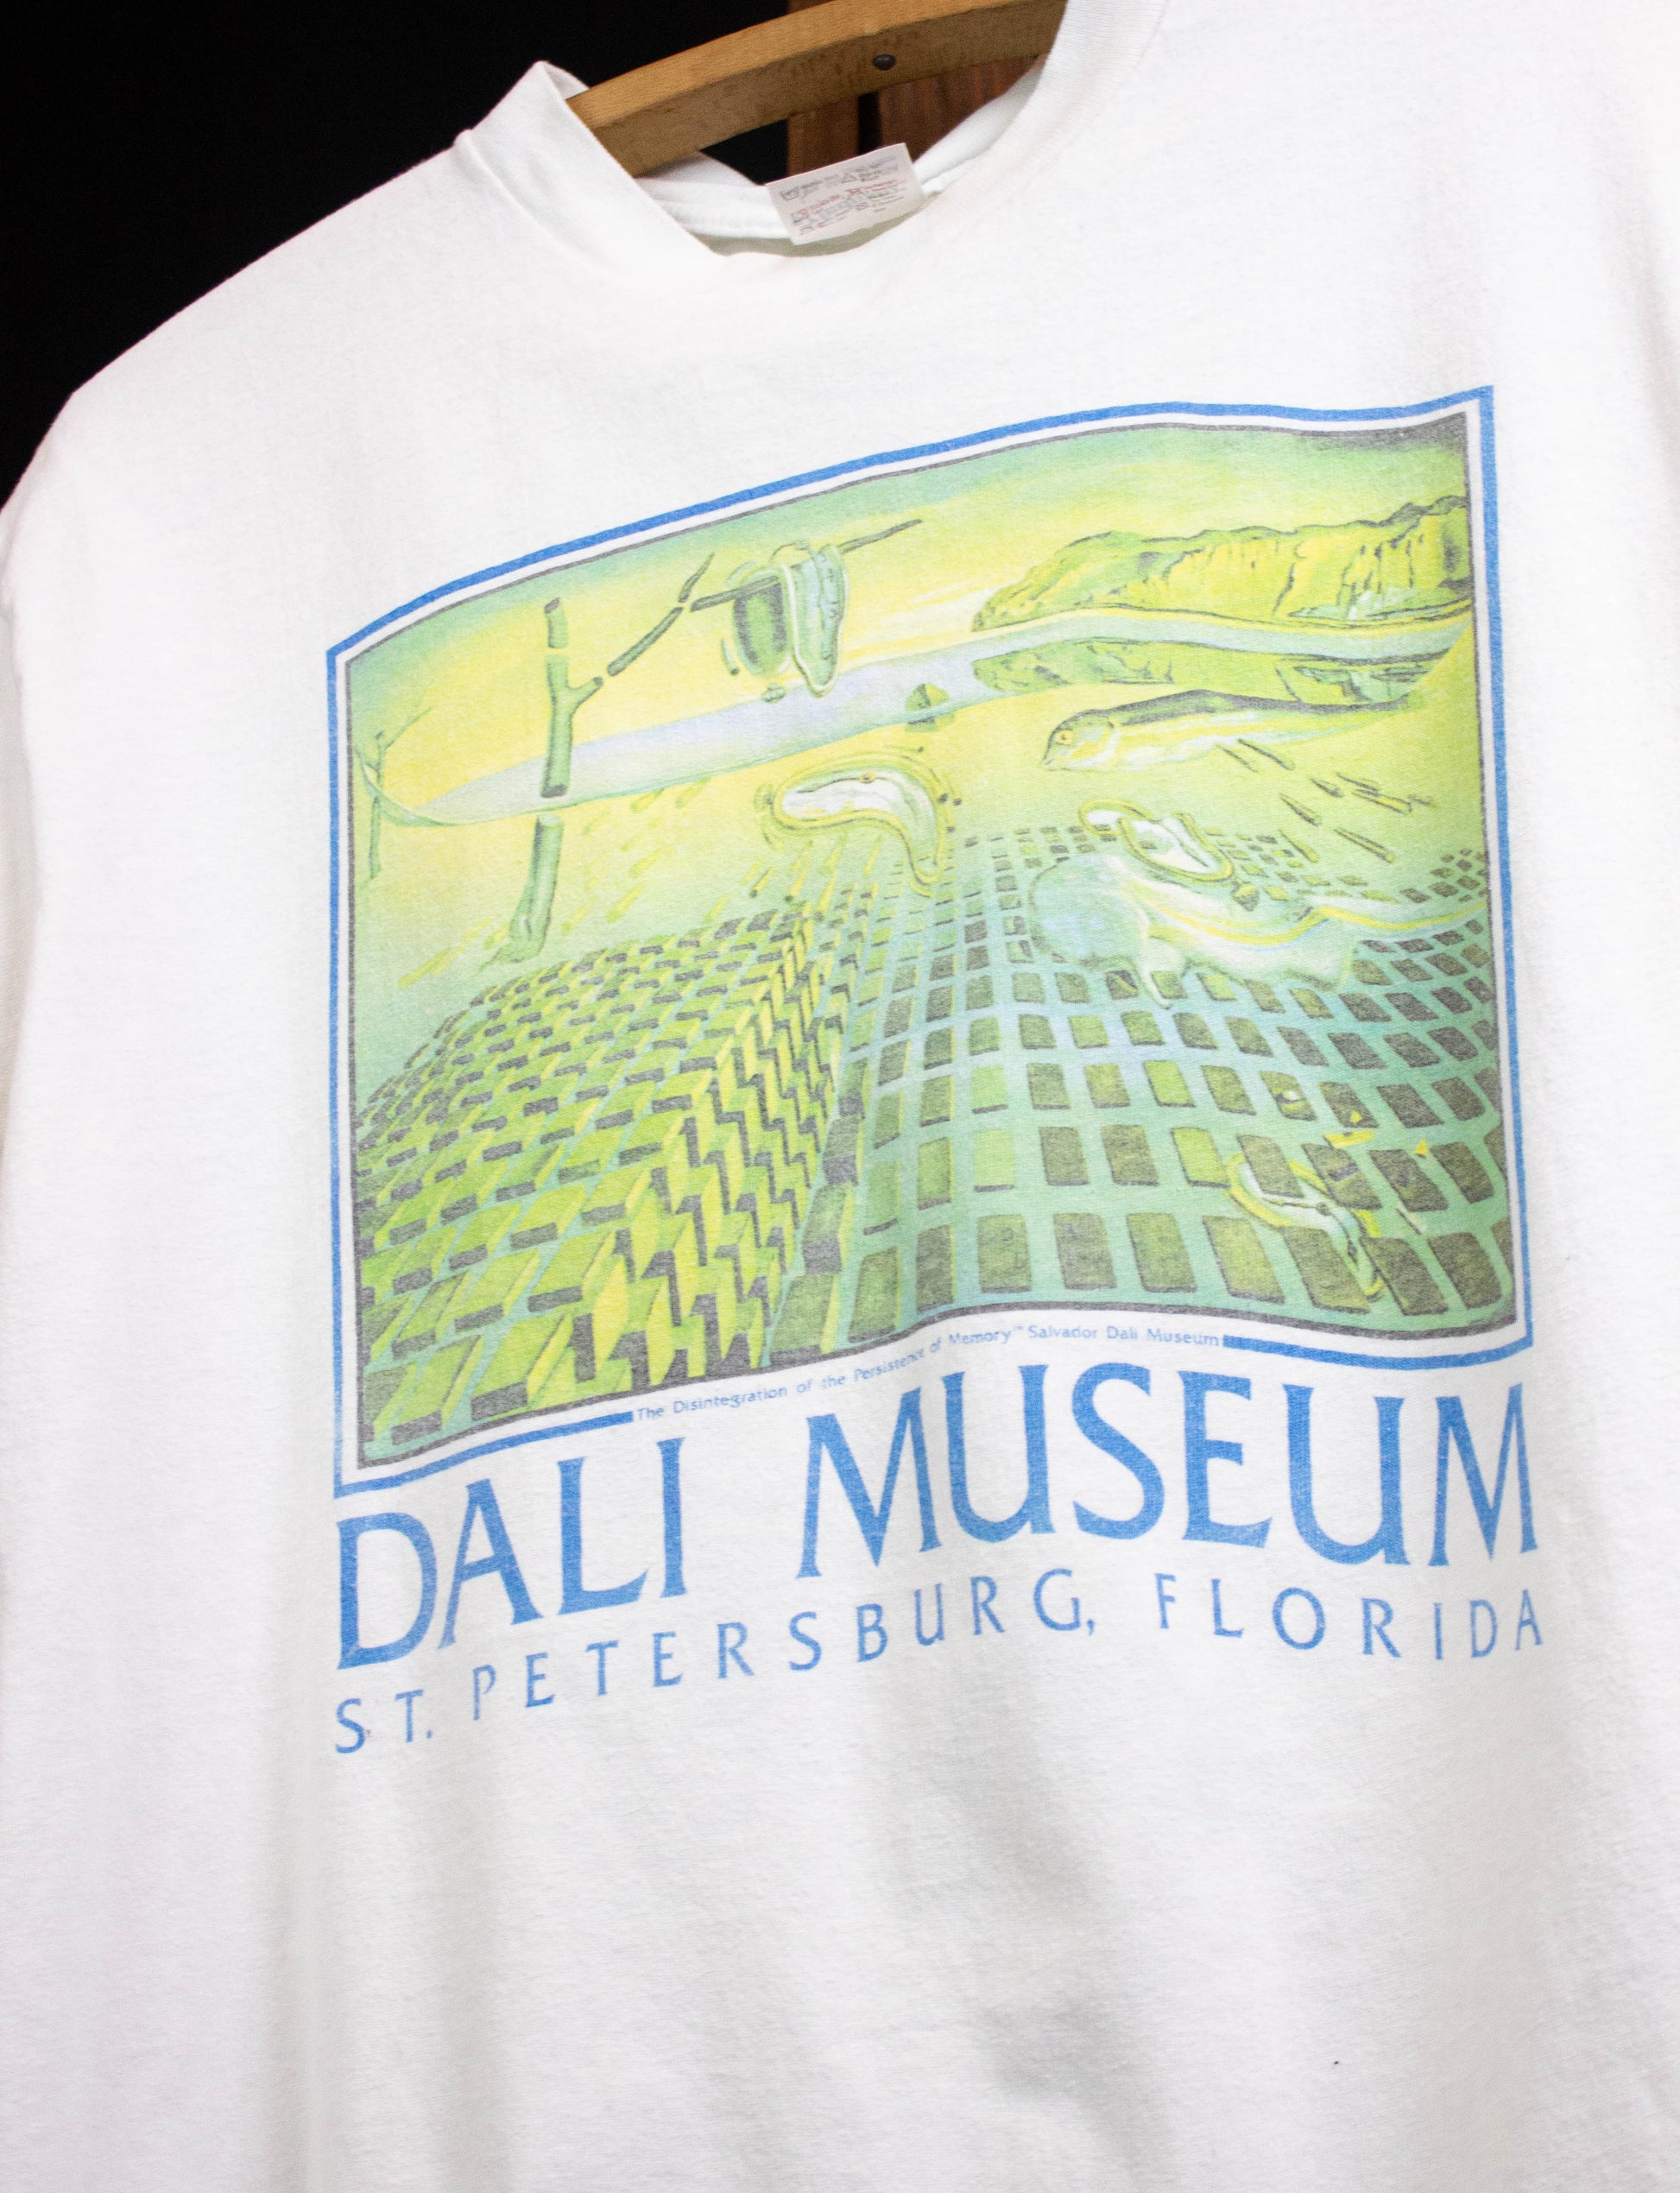 Vintage Late 80s/Early 90s "The Disintegration of the Persistence of Memory" Dali Museum St. Petersburg, Florida Graphic T Shirt White Large